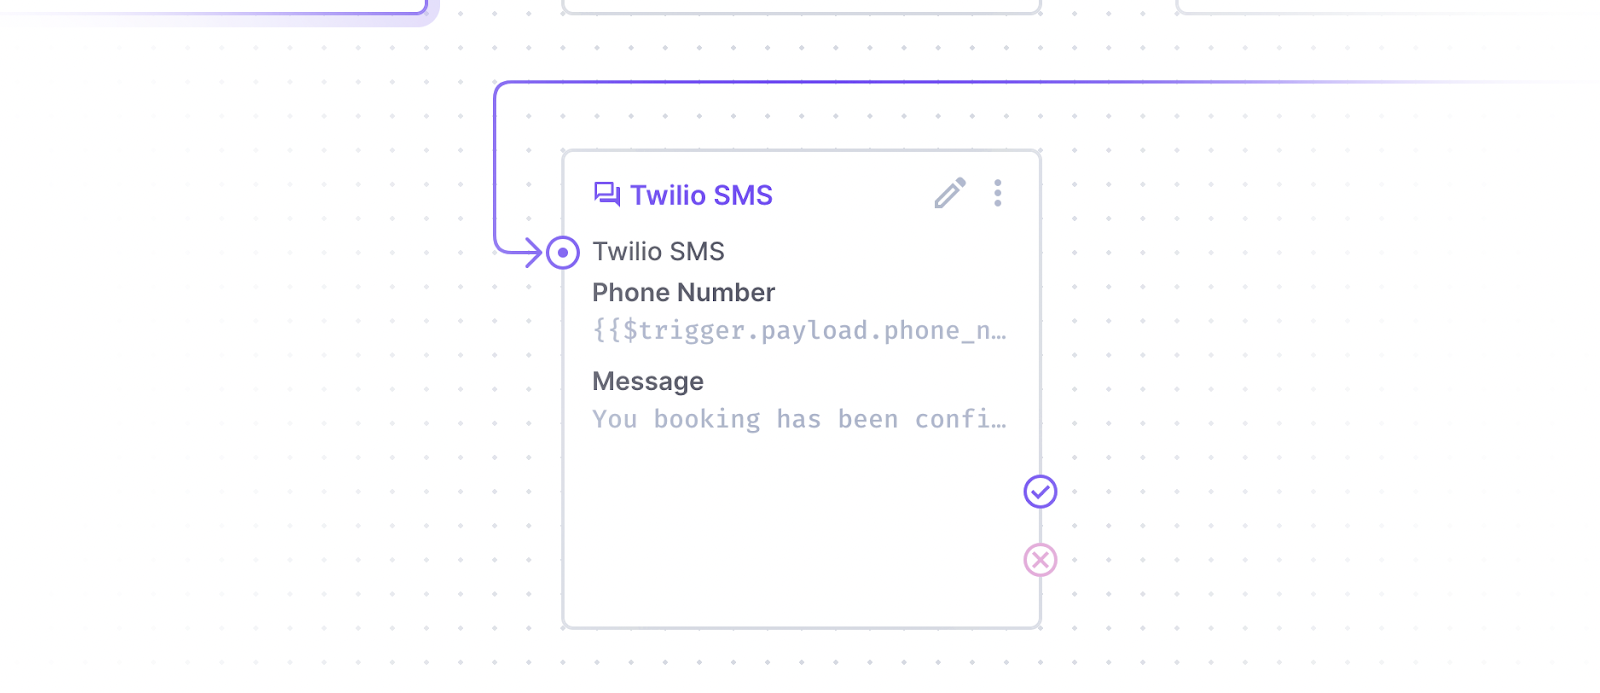 A Twilio SMS operation in a Flow